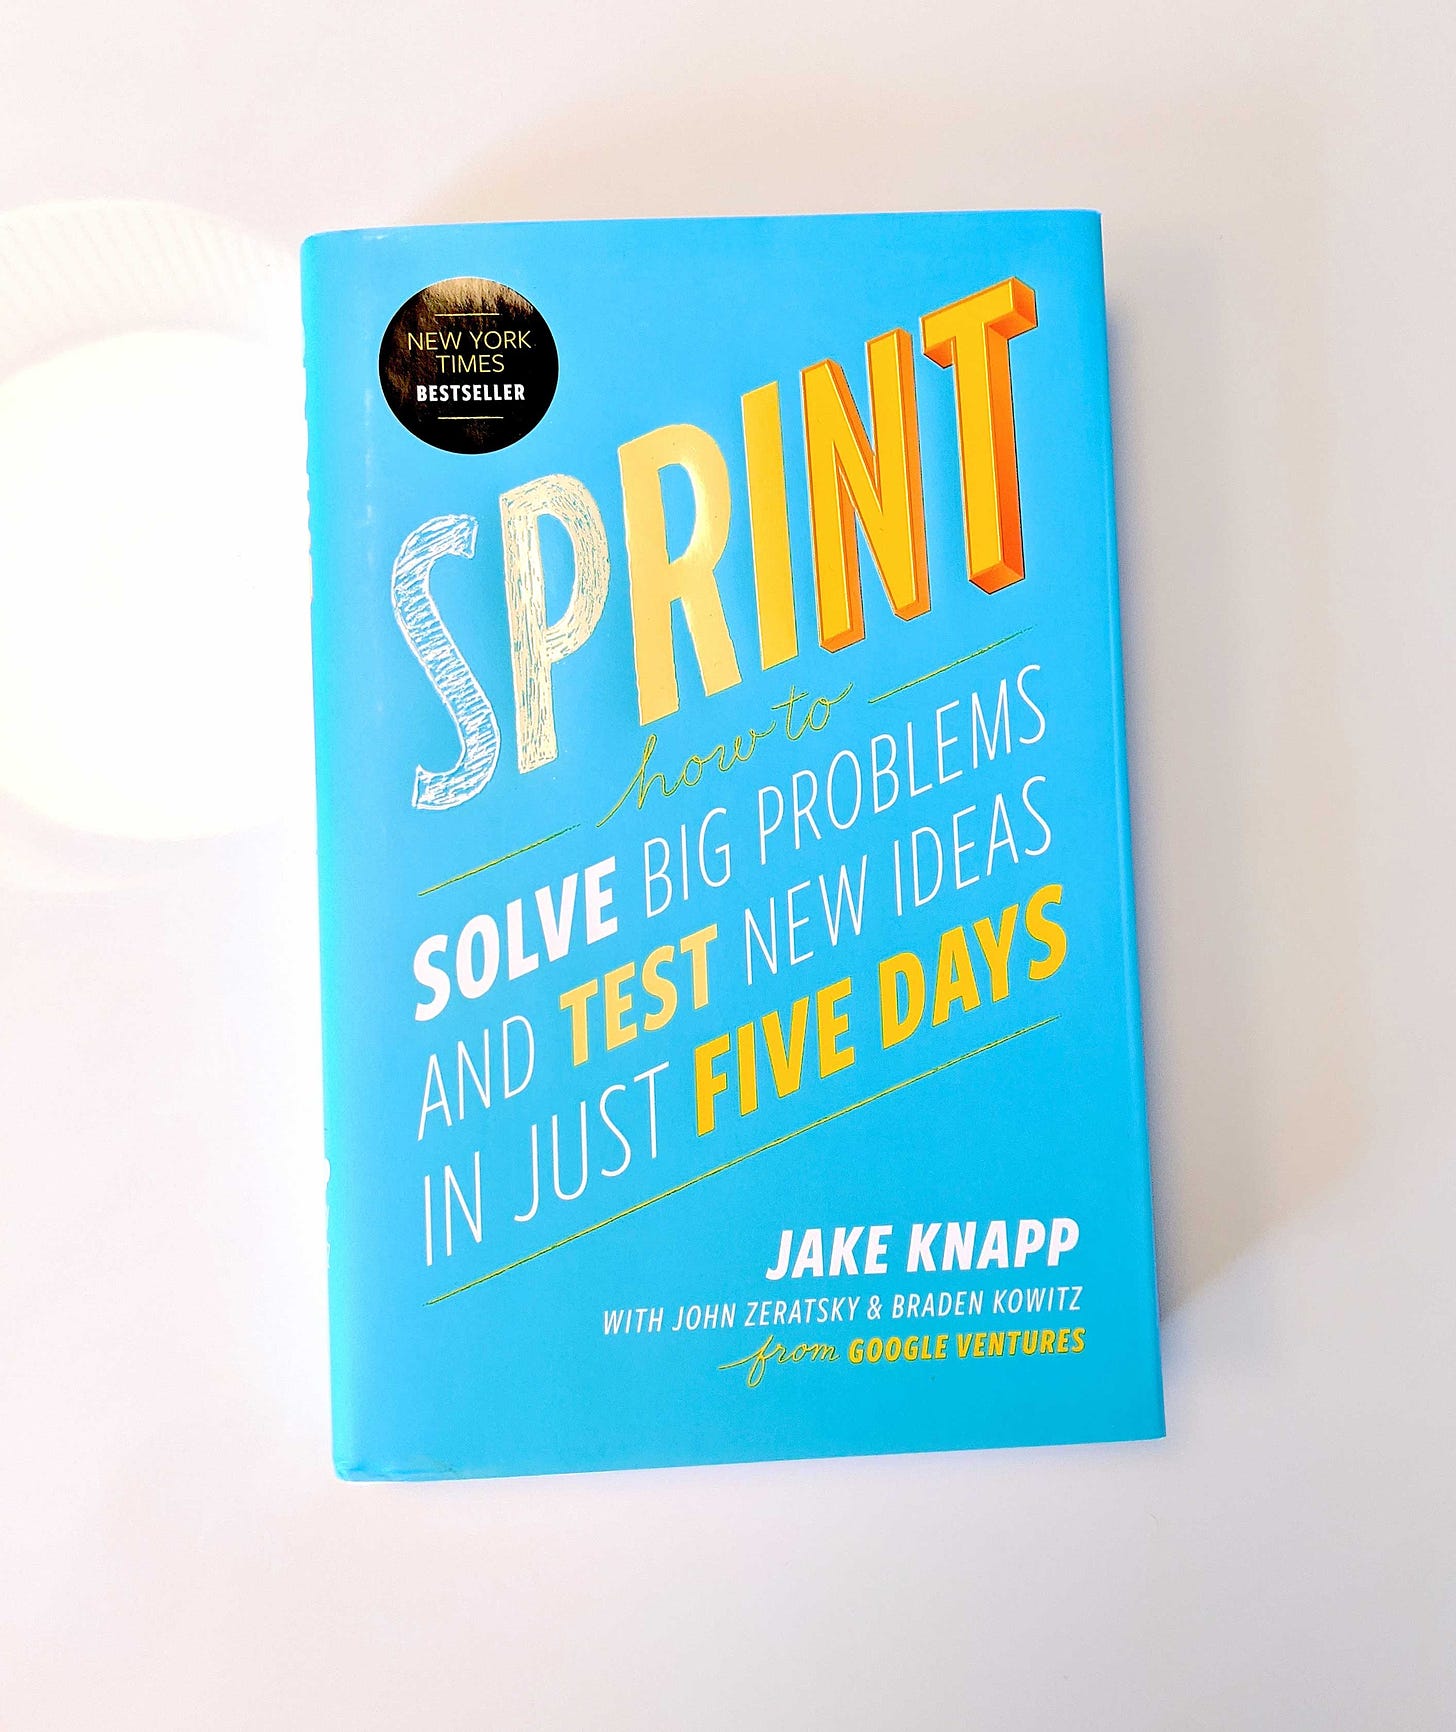 Photo of the Sprint book